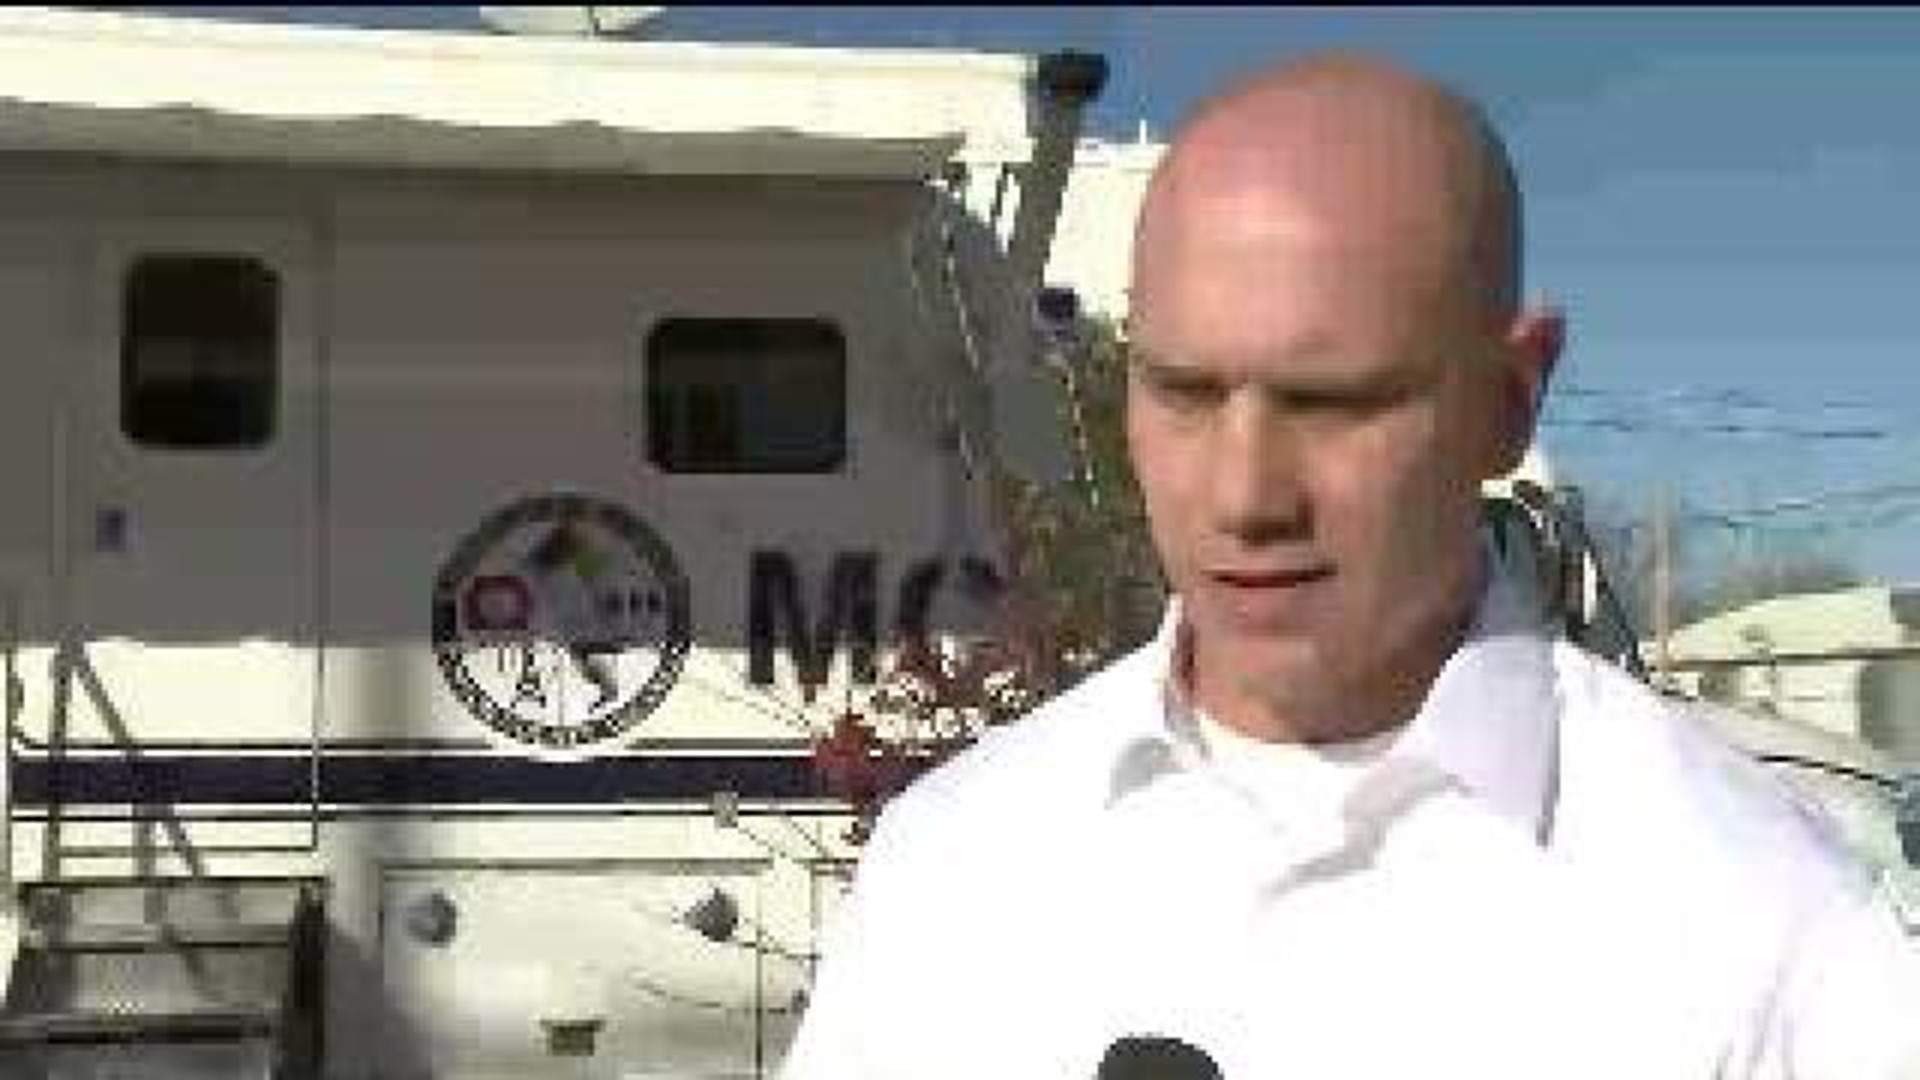 Mobile Command Unit Aids Police Investigating Homicide